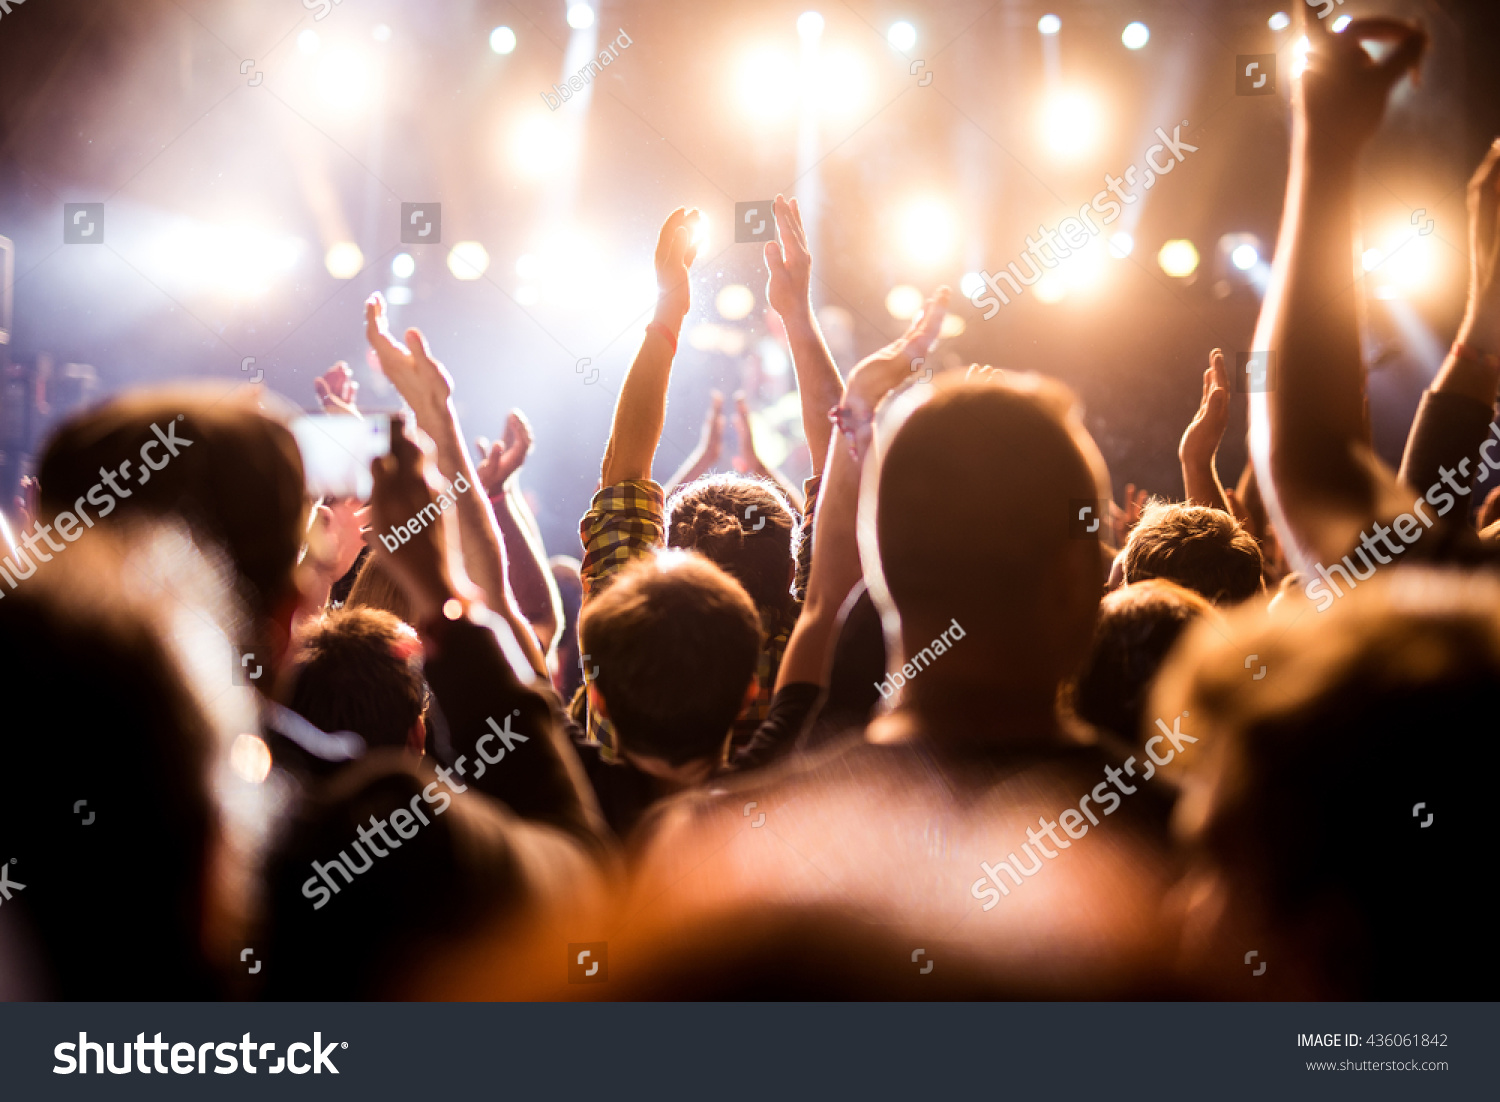 34,657 Hands in the air party Images, Stock Photos & Vectors | Shutterstock